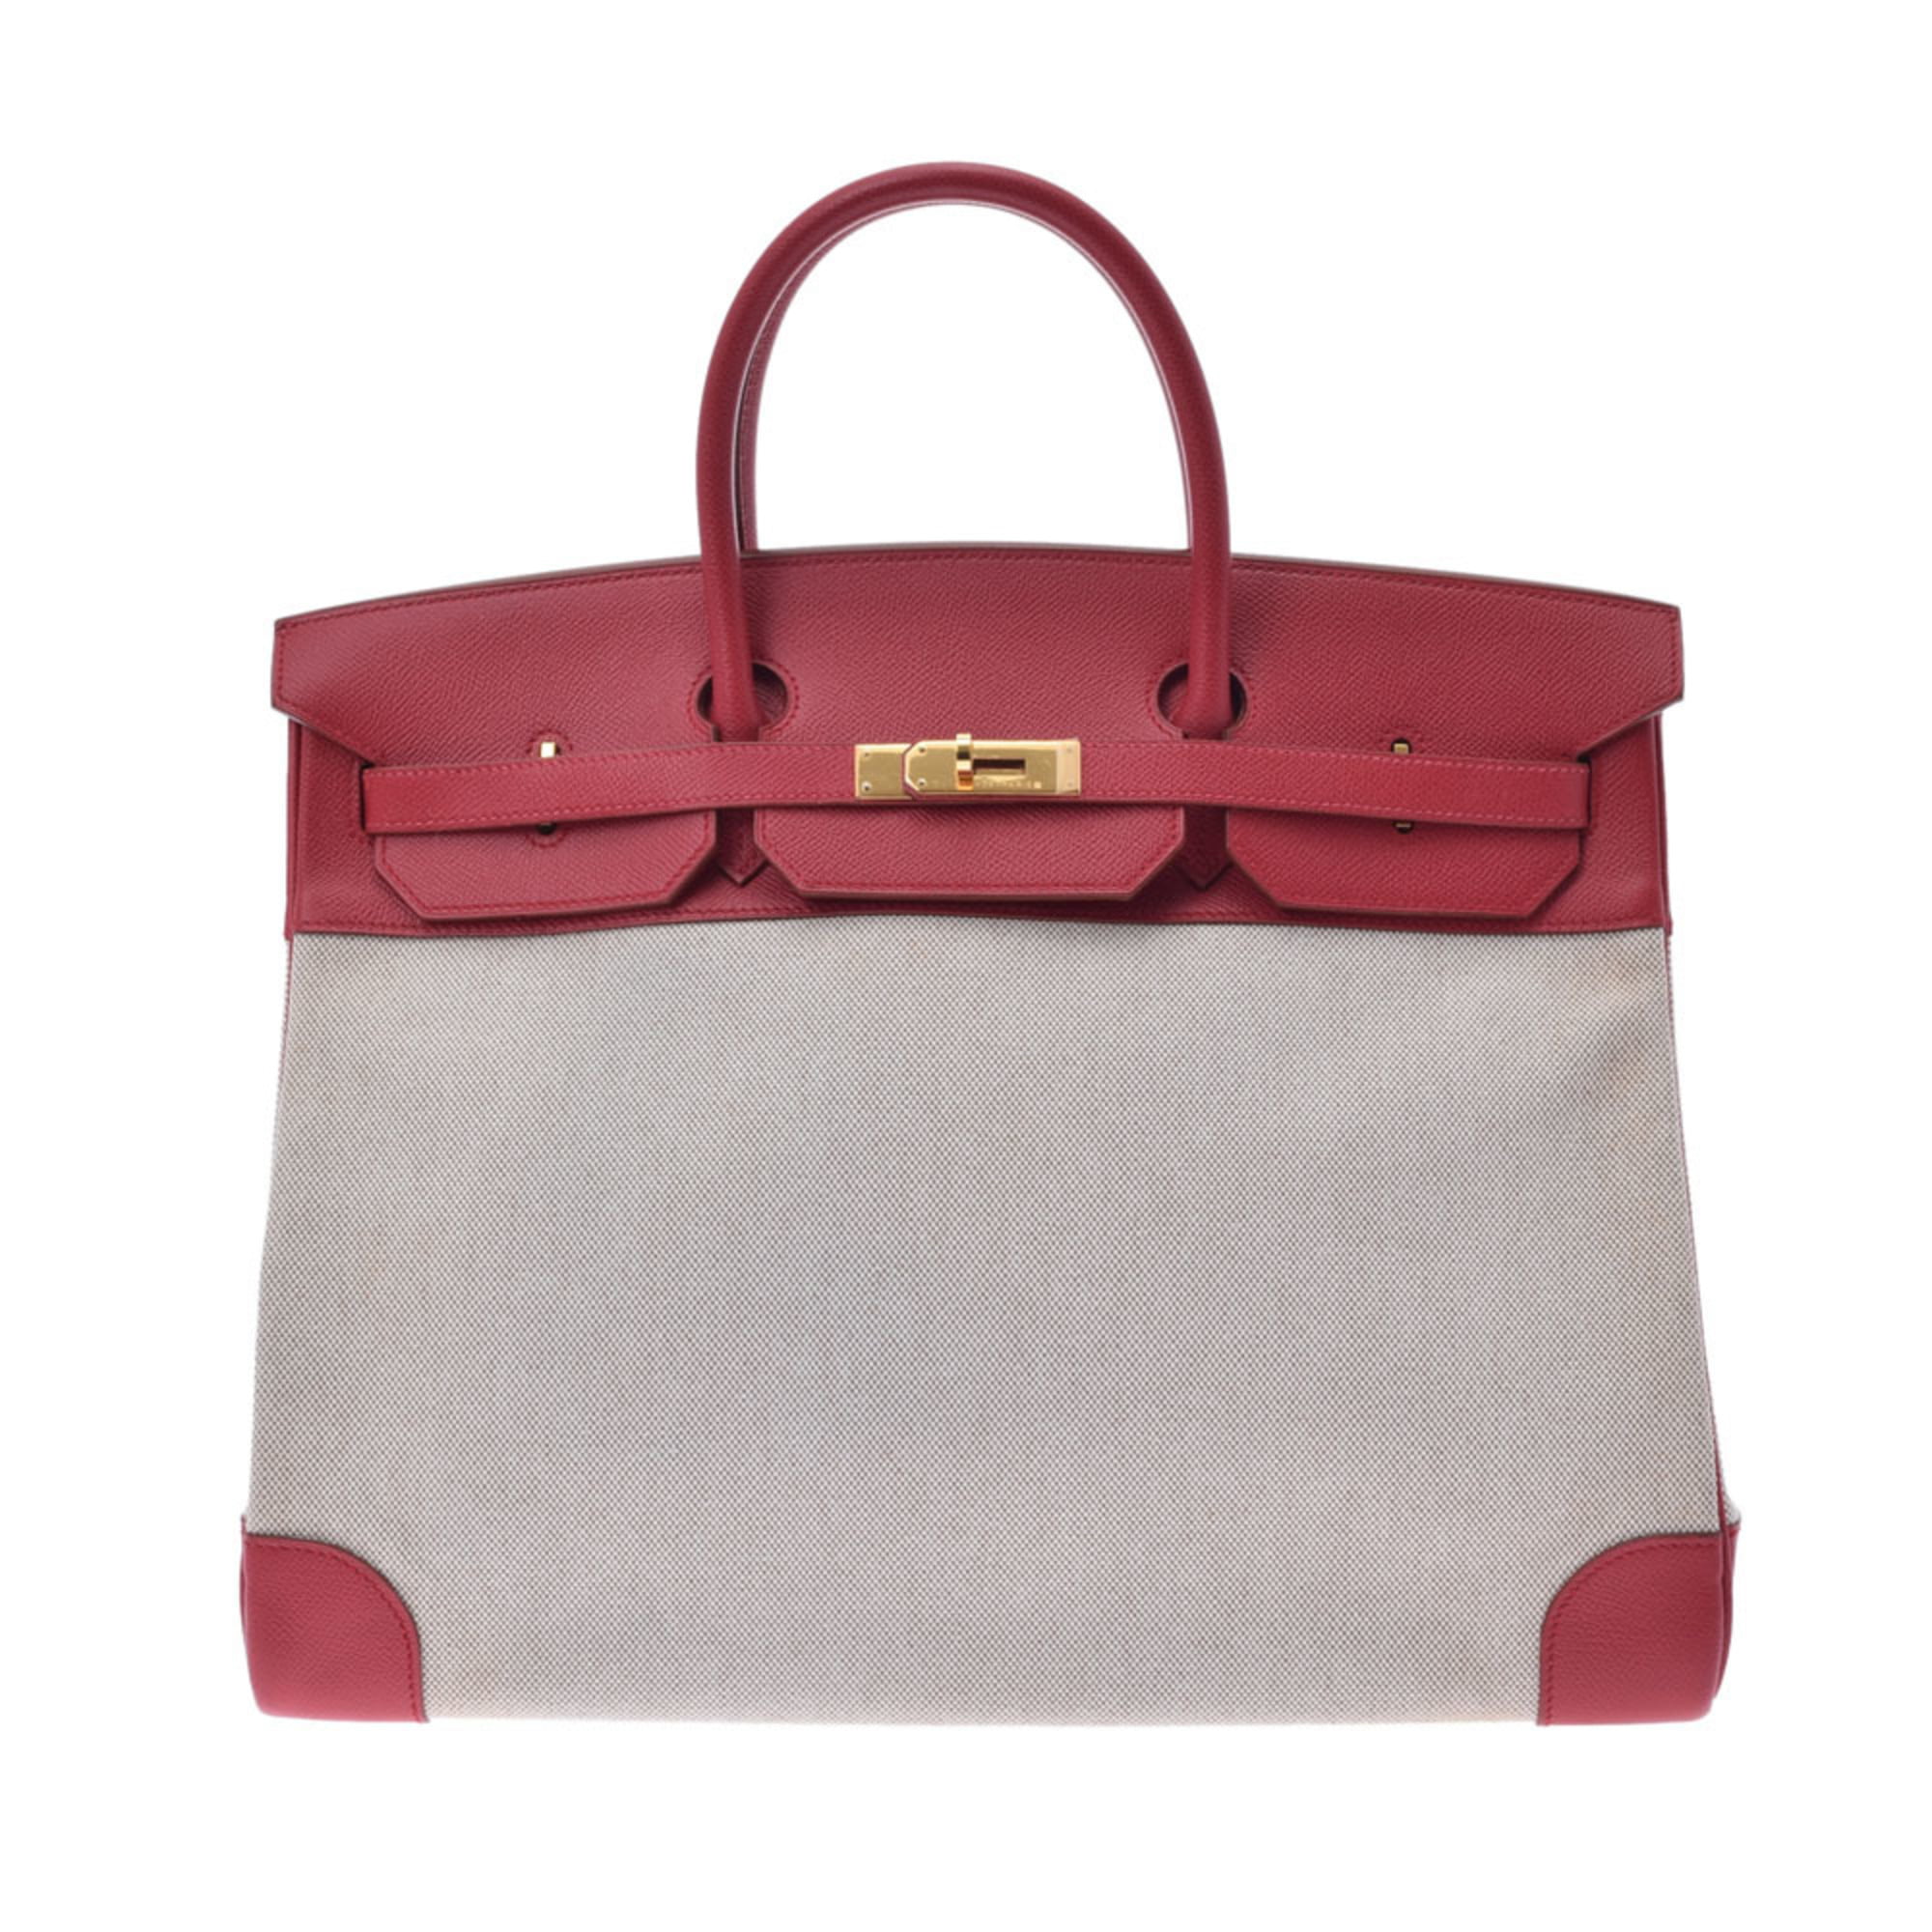 Hermes very special birkin bags! 40cm rouge vif ostrich with gold